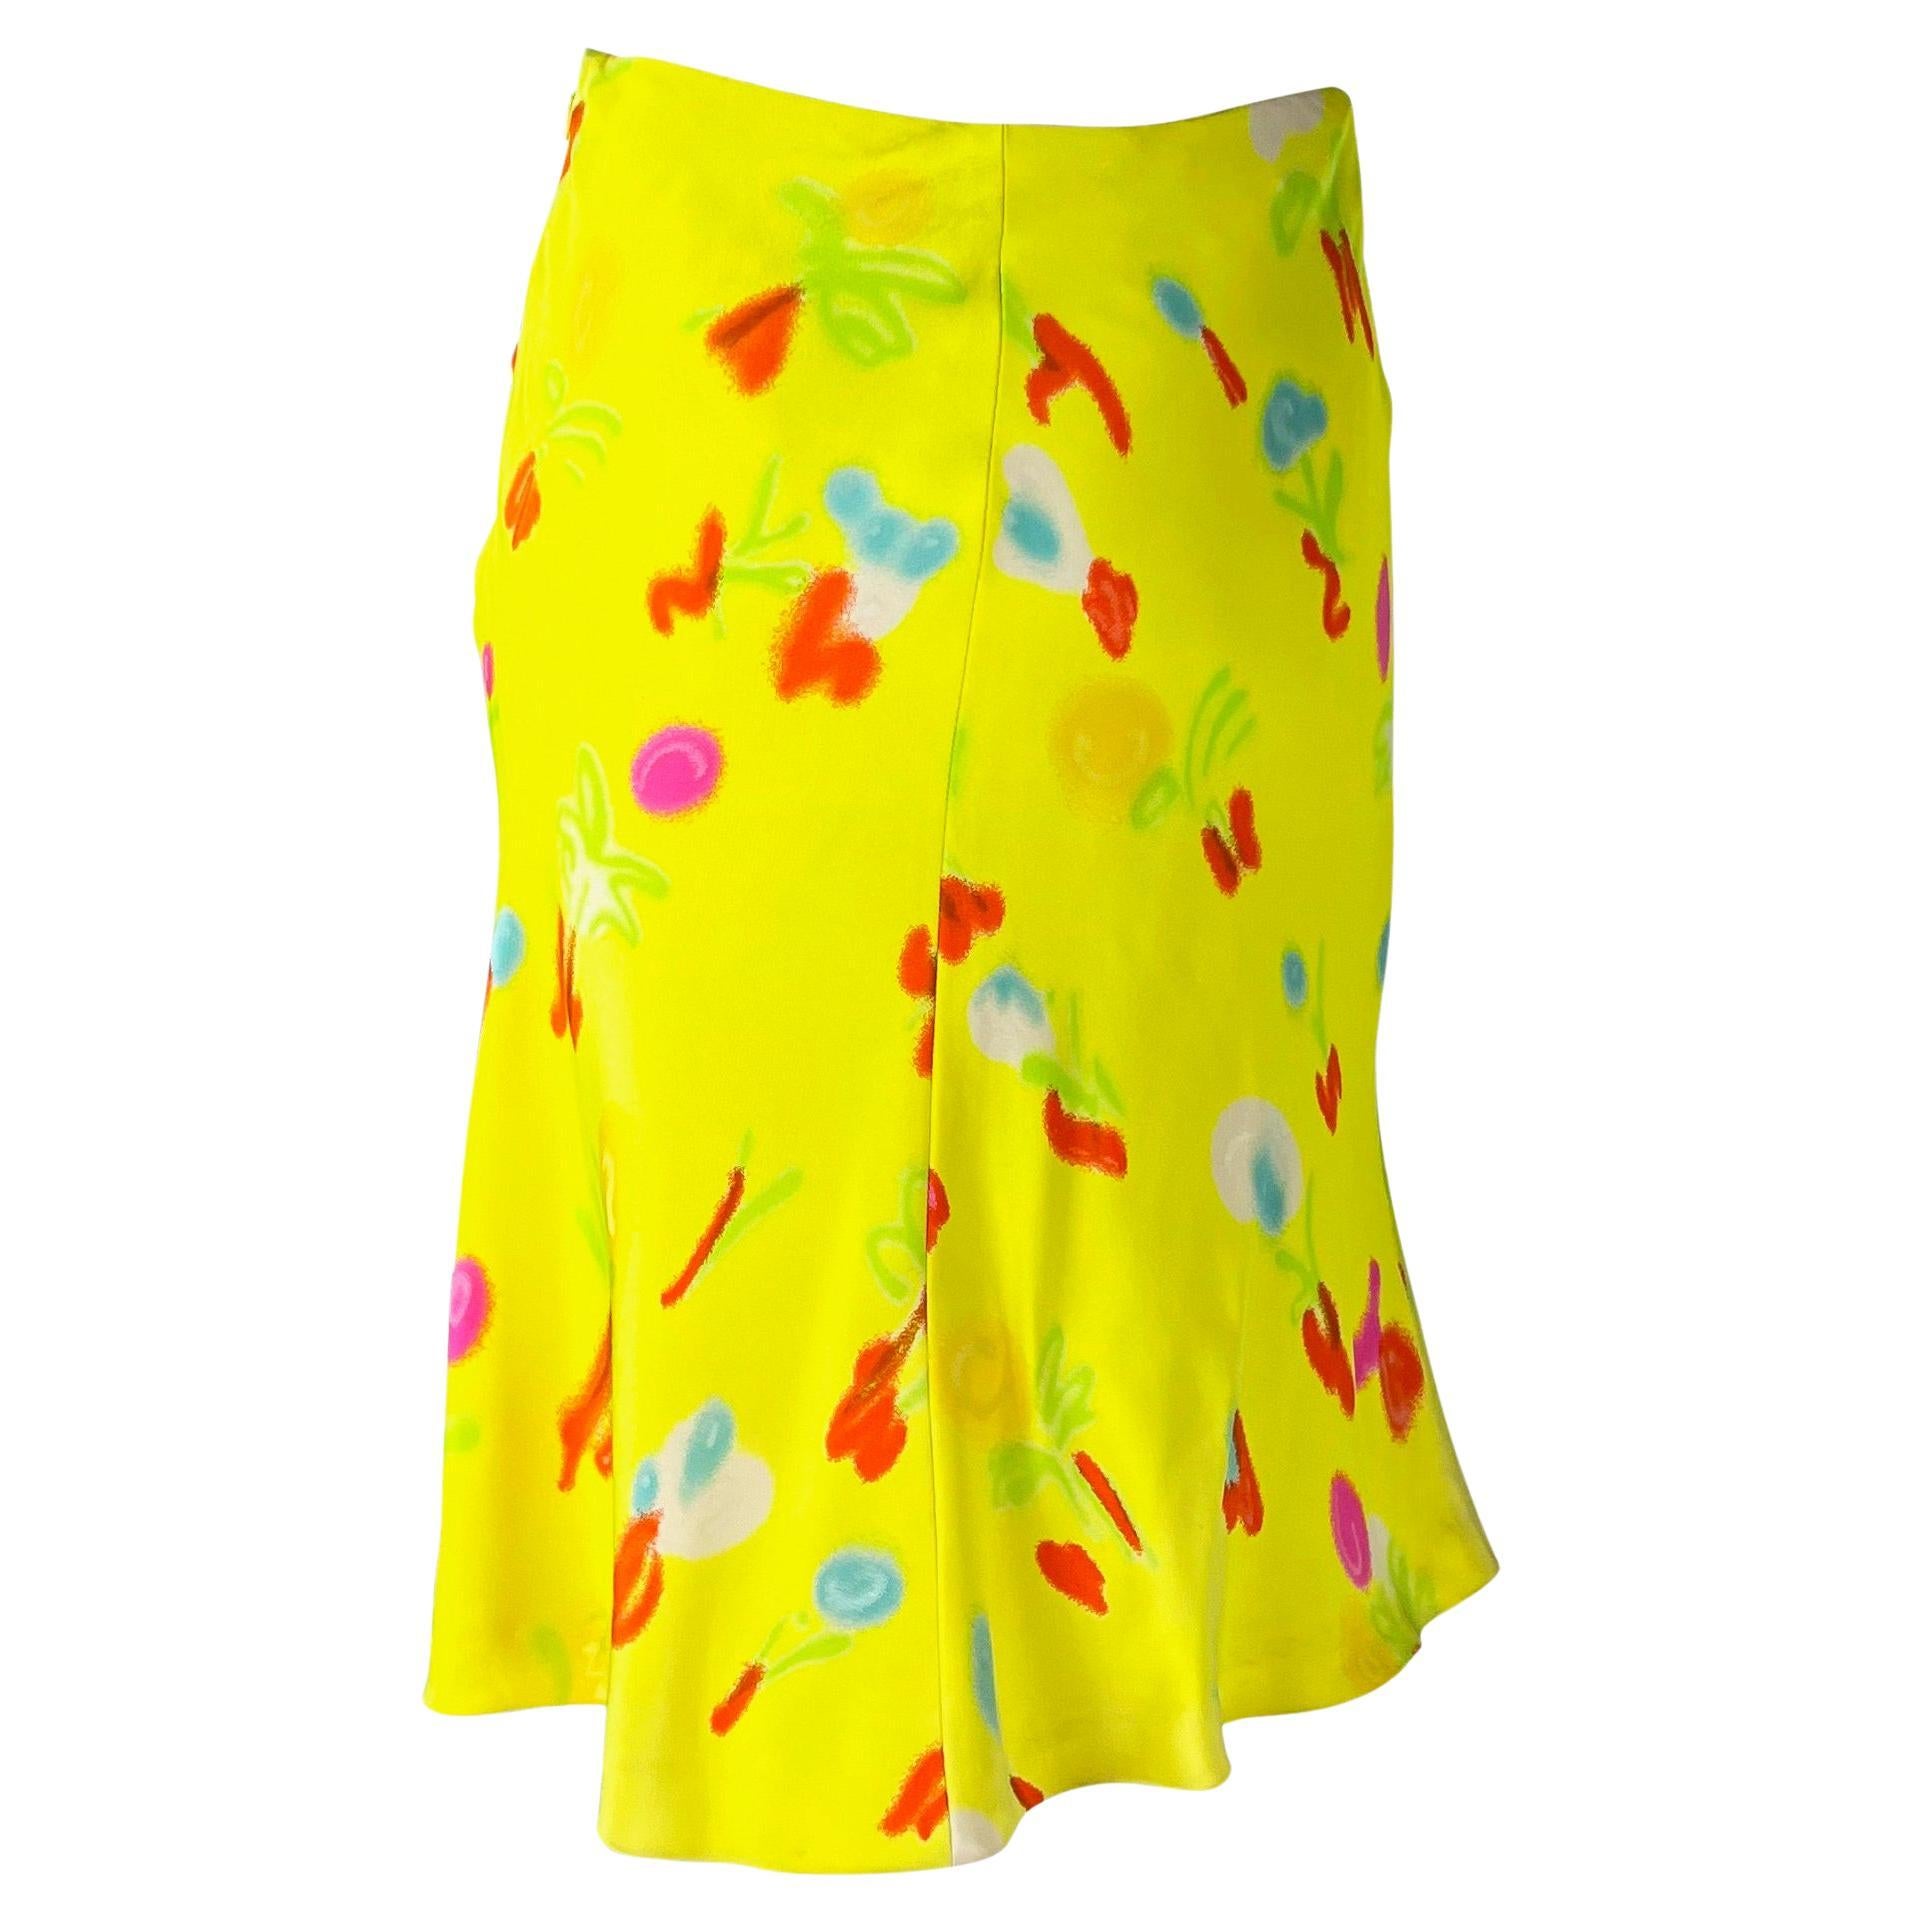 NWT S/S 1996 Gianni Versace Couture Neon Yellow Graffiti Floral Print Skirt For Sale 1